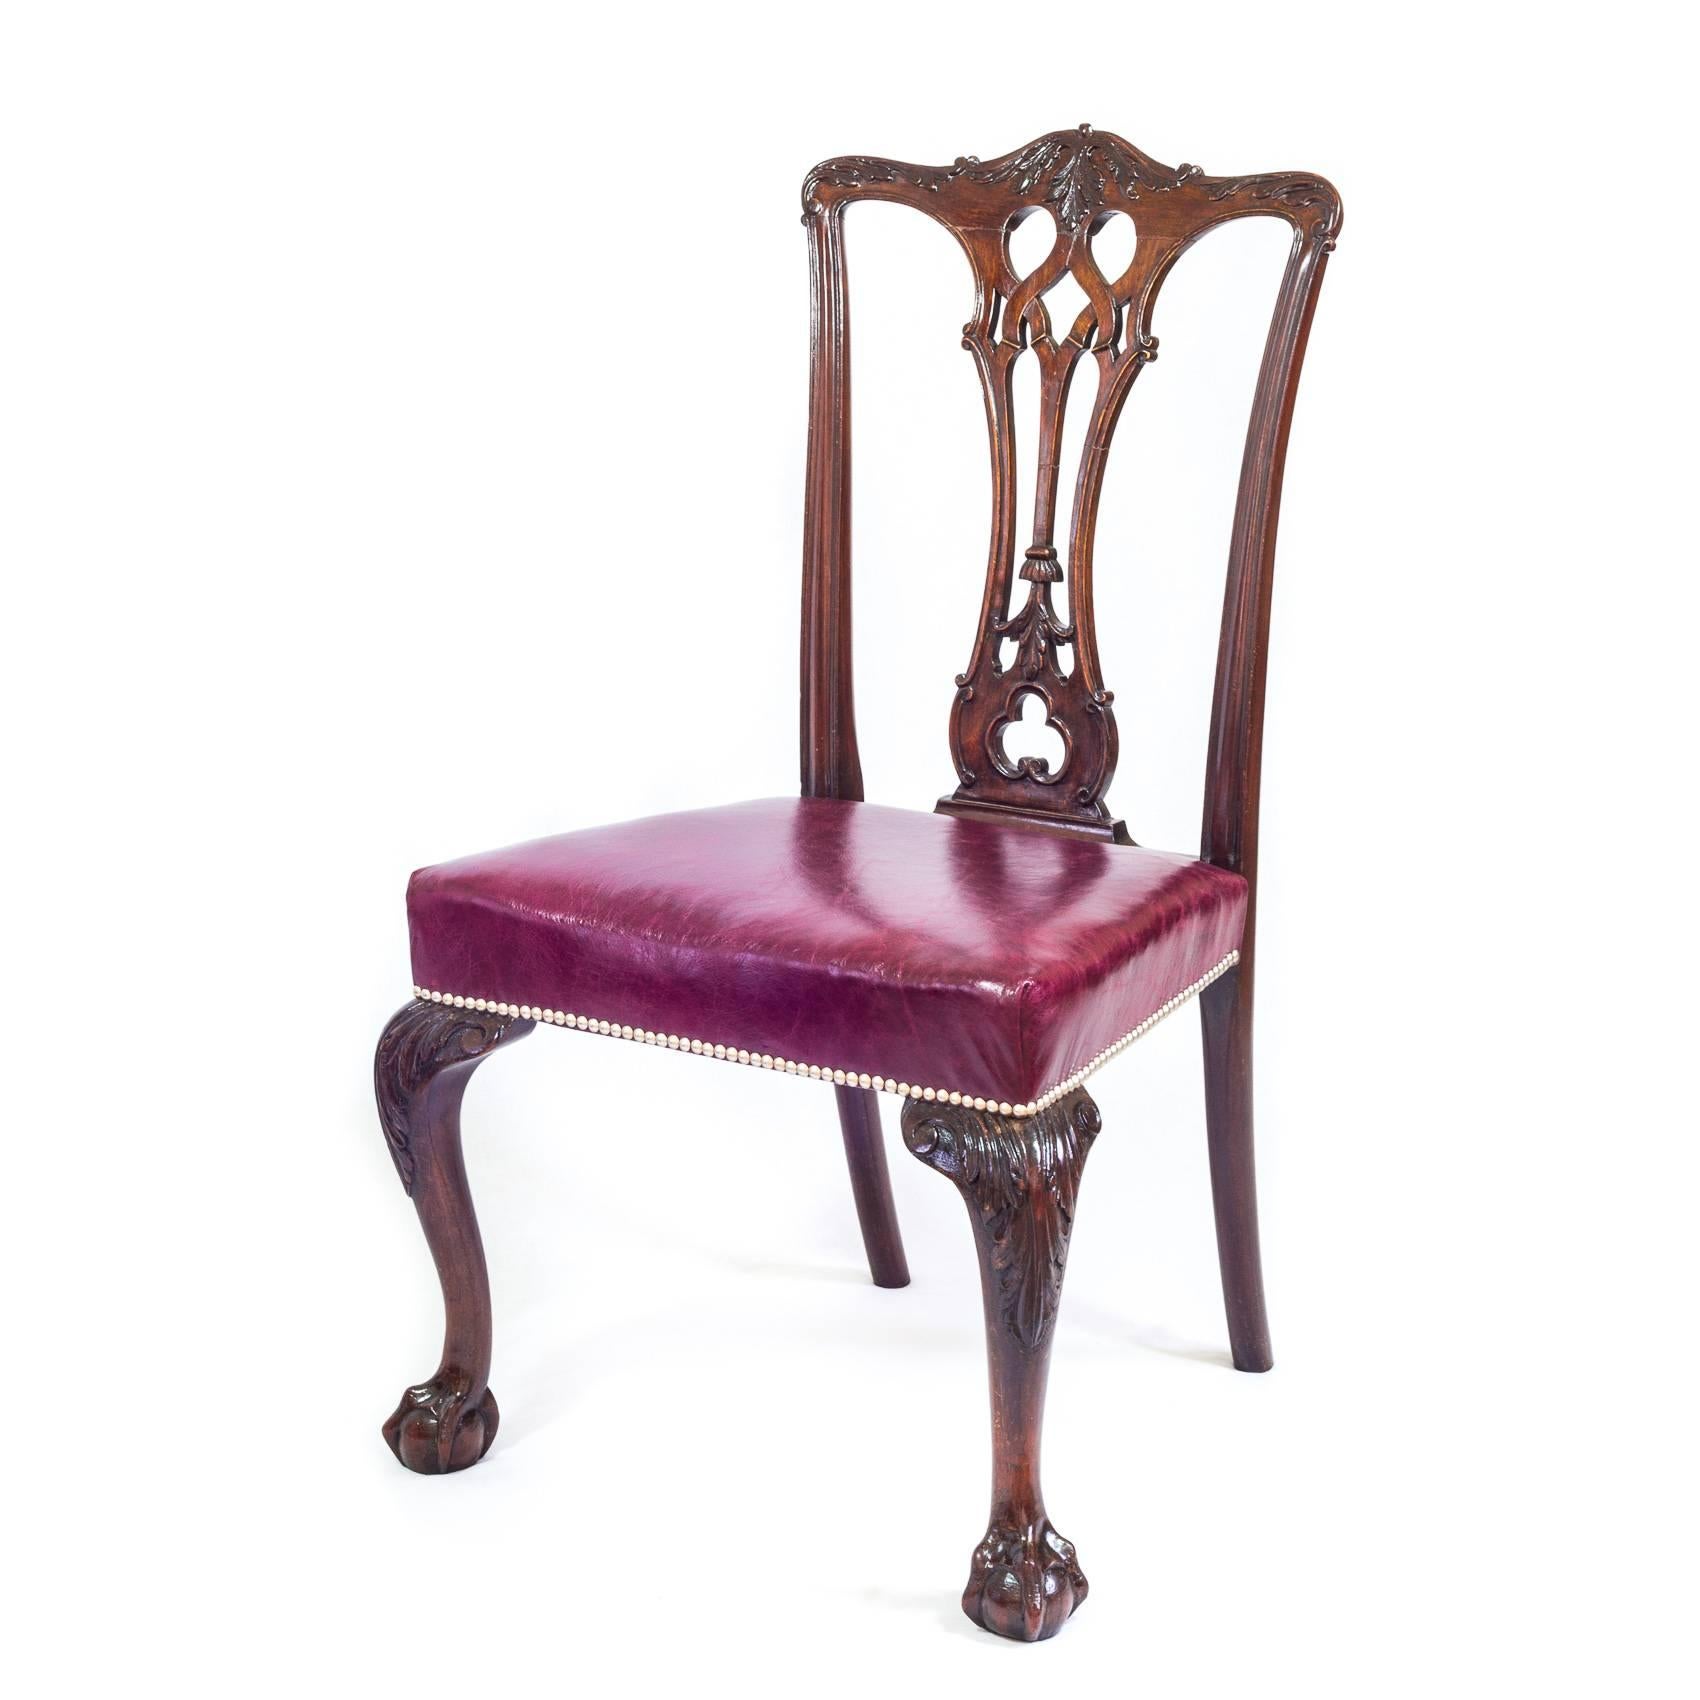 A good late 19th century set of four generously proportioned mahogany dining chairs in the Gothic Chippendale taste, with pierced splats of gothic inspiration below the top rail carved with acanthus scrolls, the stuff-over seats covered in Burgundy